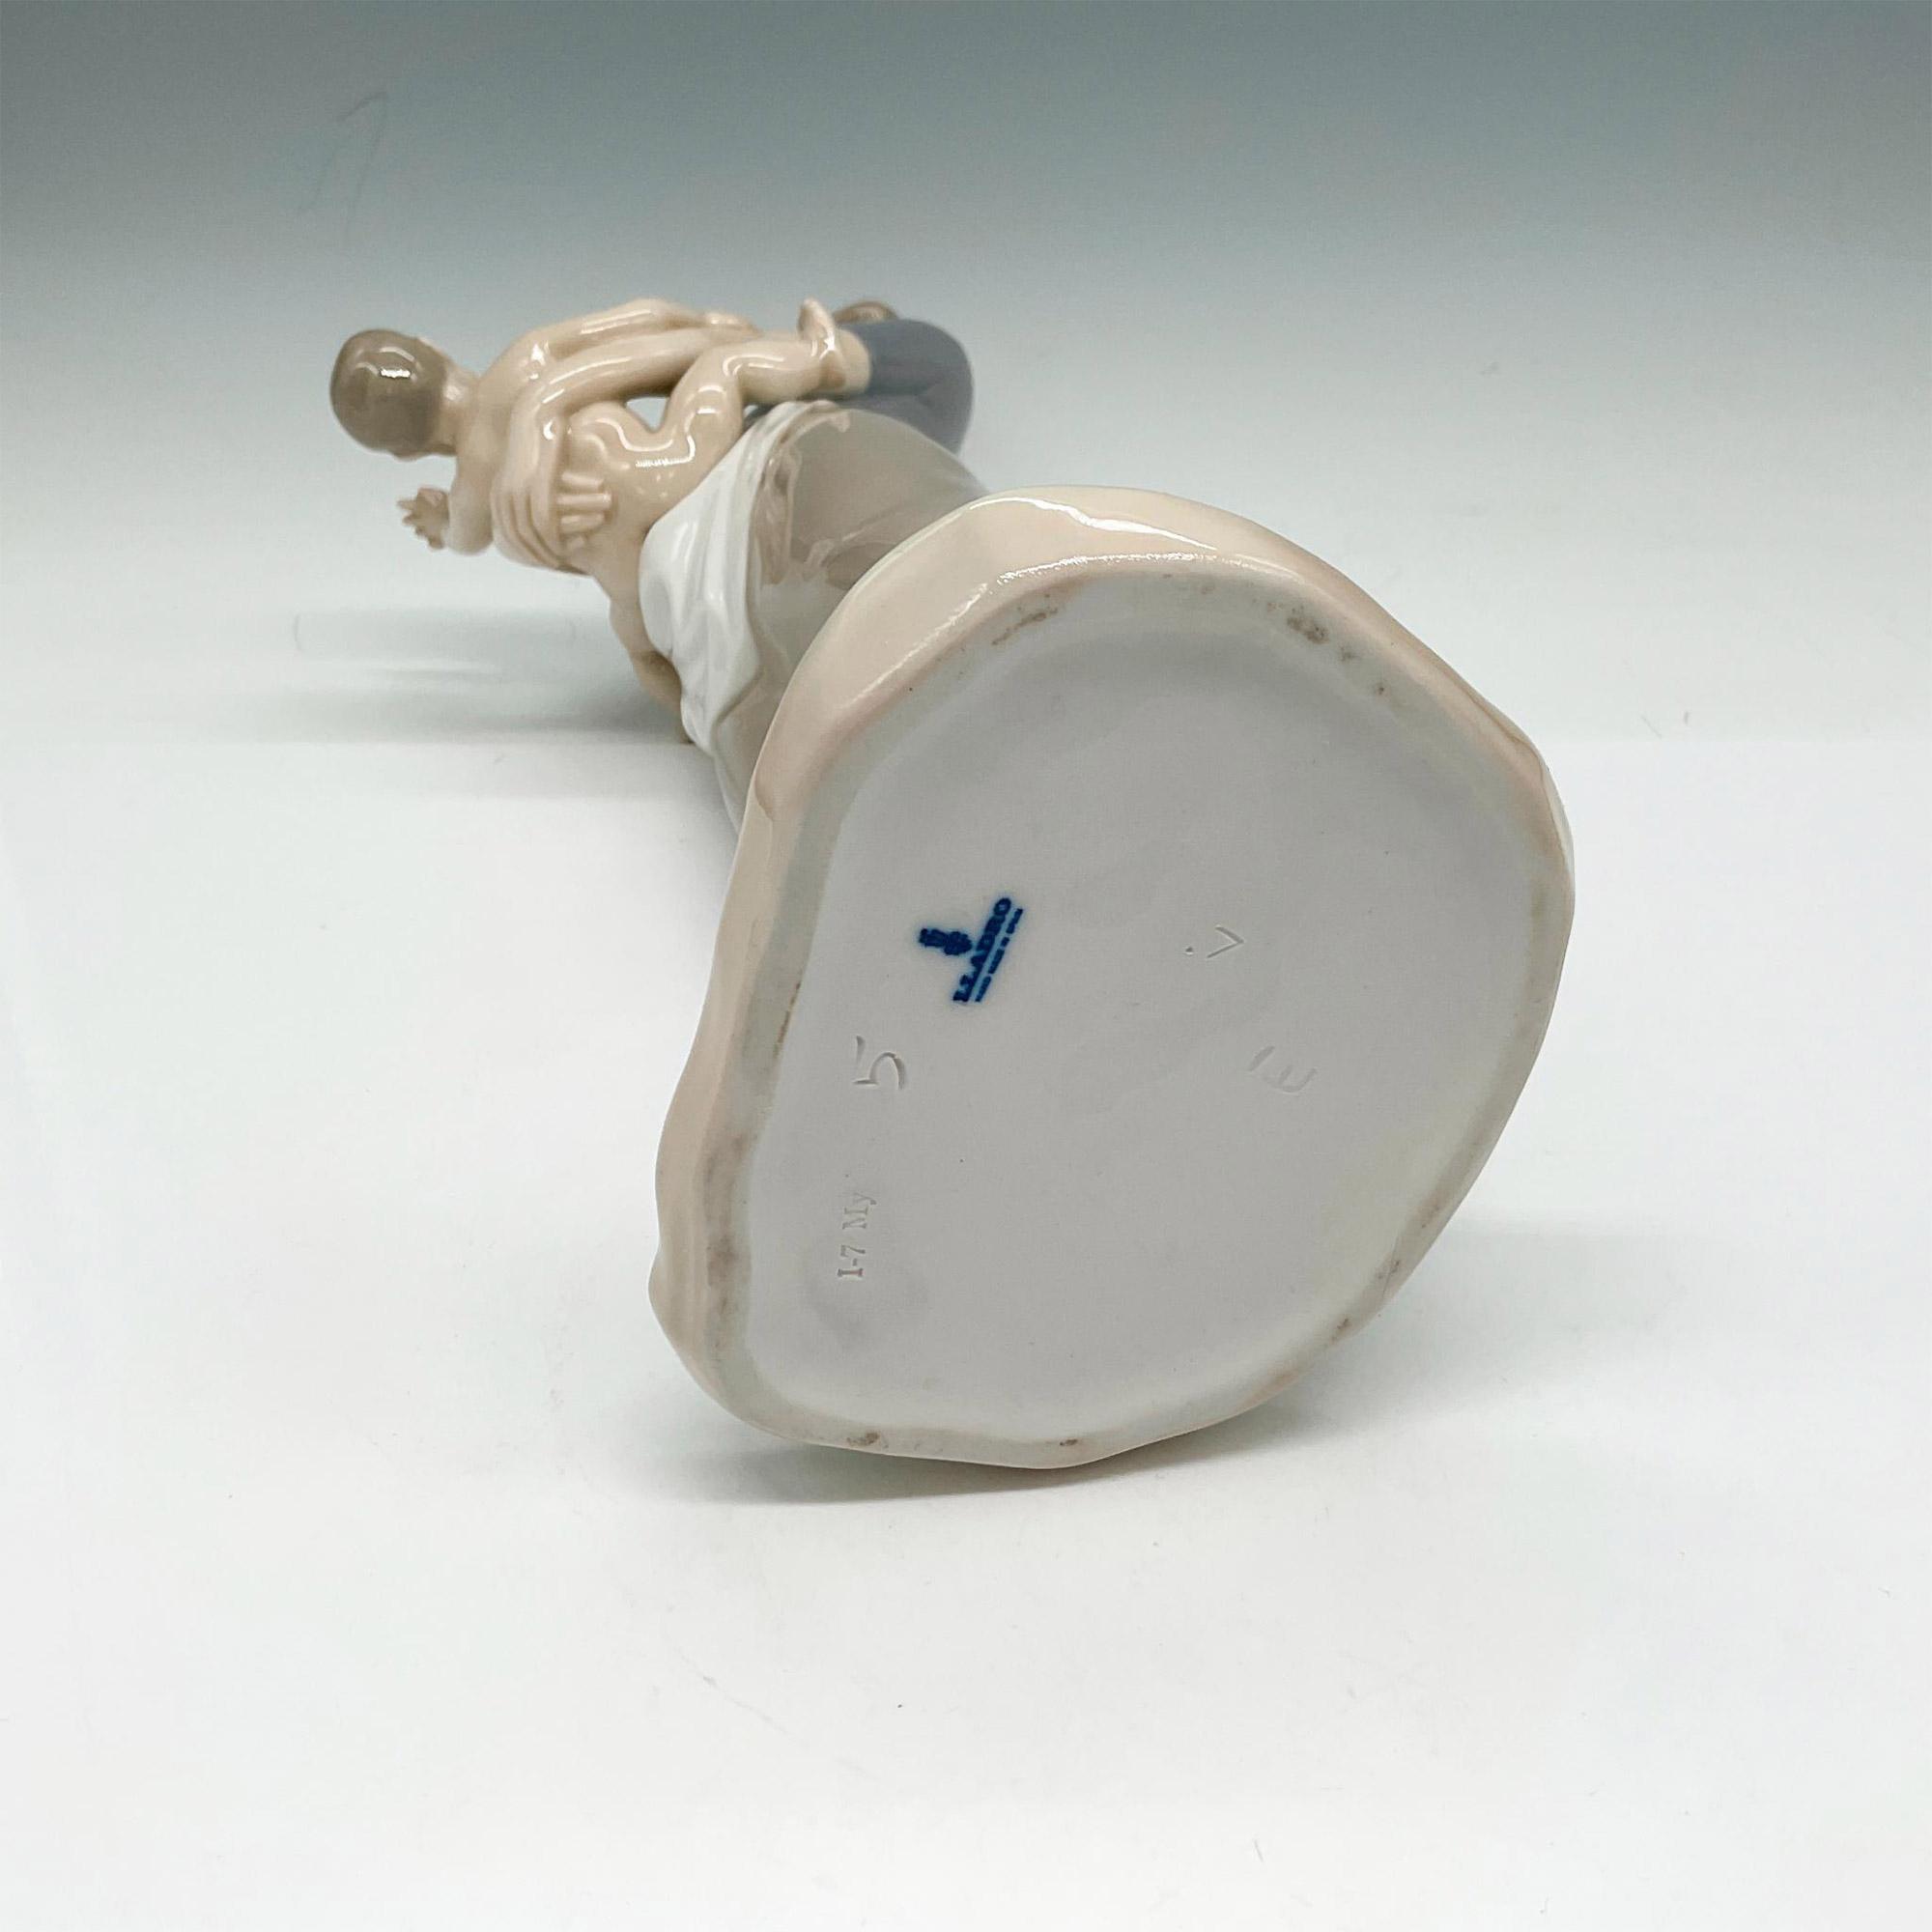 Mother and Child 1004575 - Lladro Porcelain Figurine - Image 3 of 3